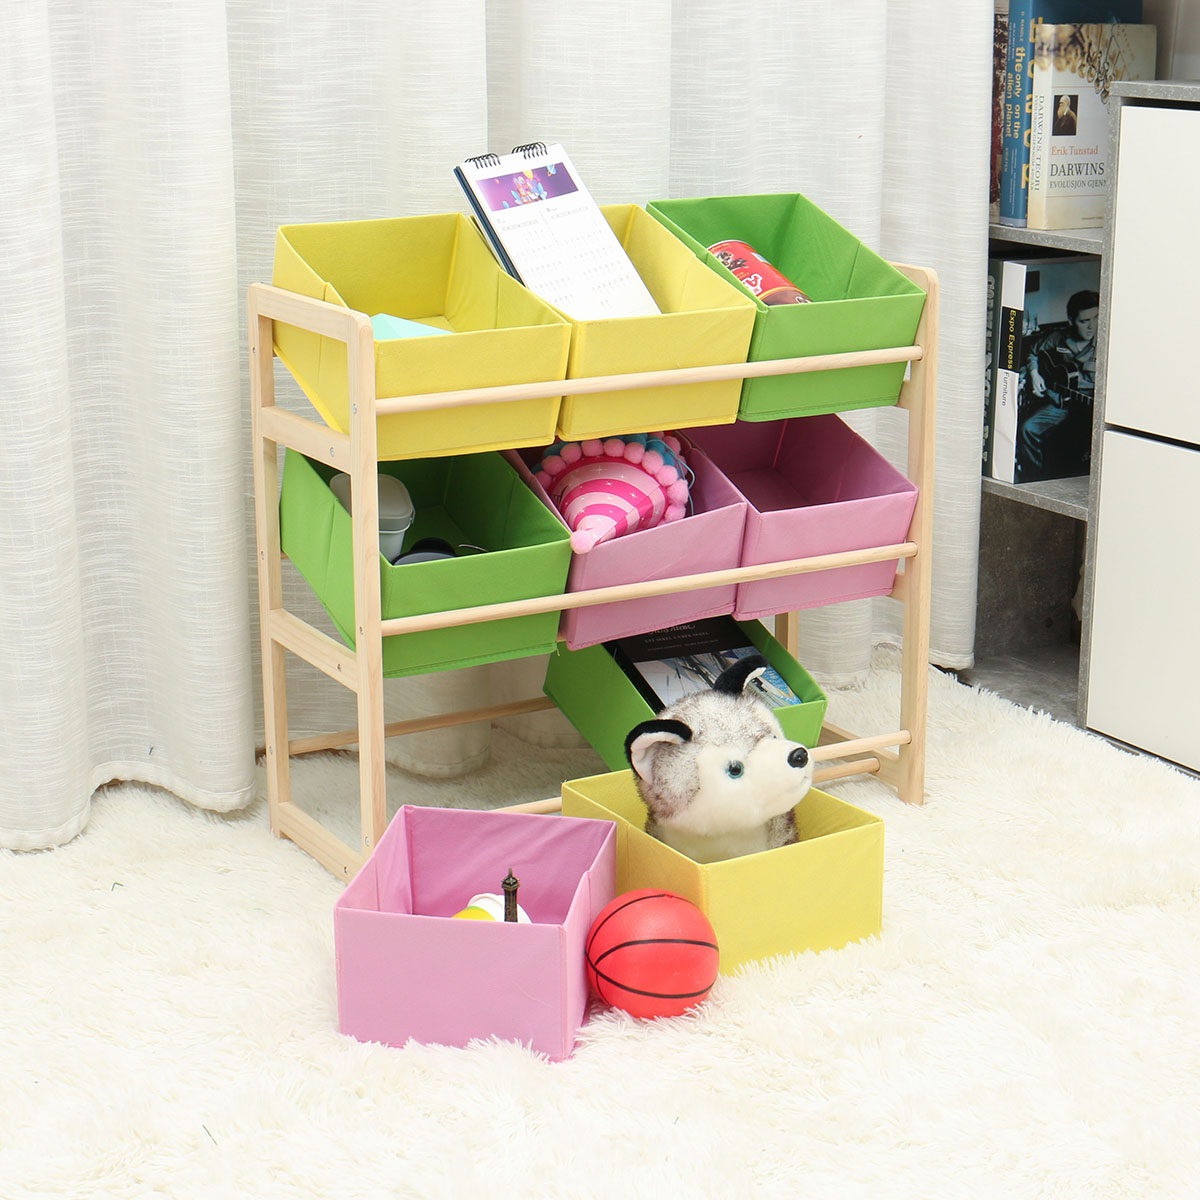 66309CM-Yellow-Pink-Green-Solid-Wood-Childrens-Toy-Rack-Storage-Rack-Toy-Rack-1754652-3